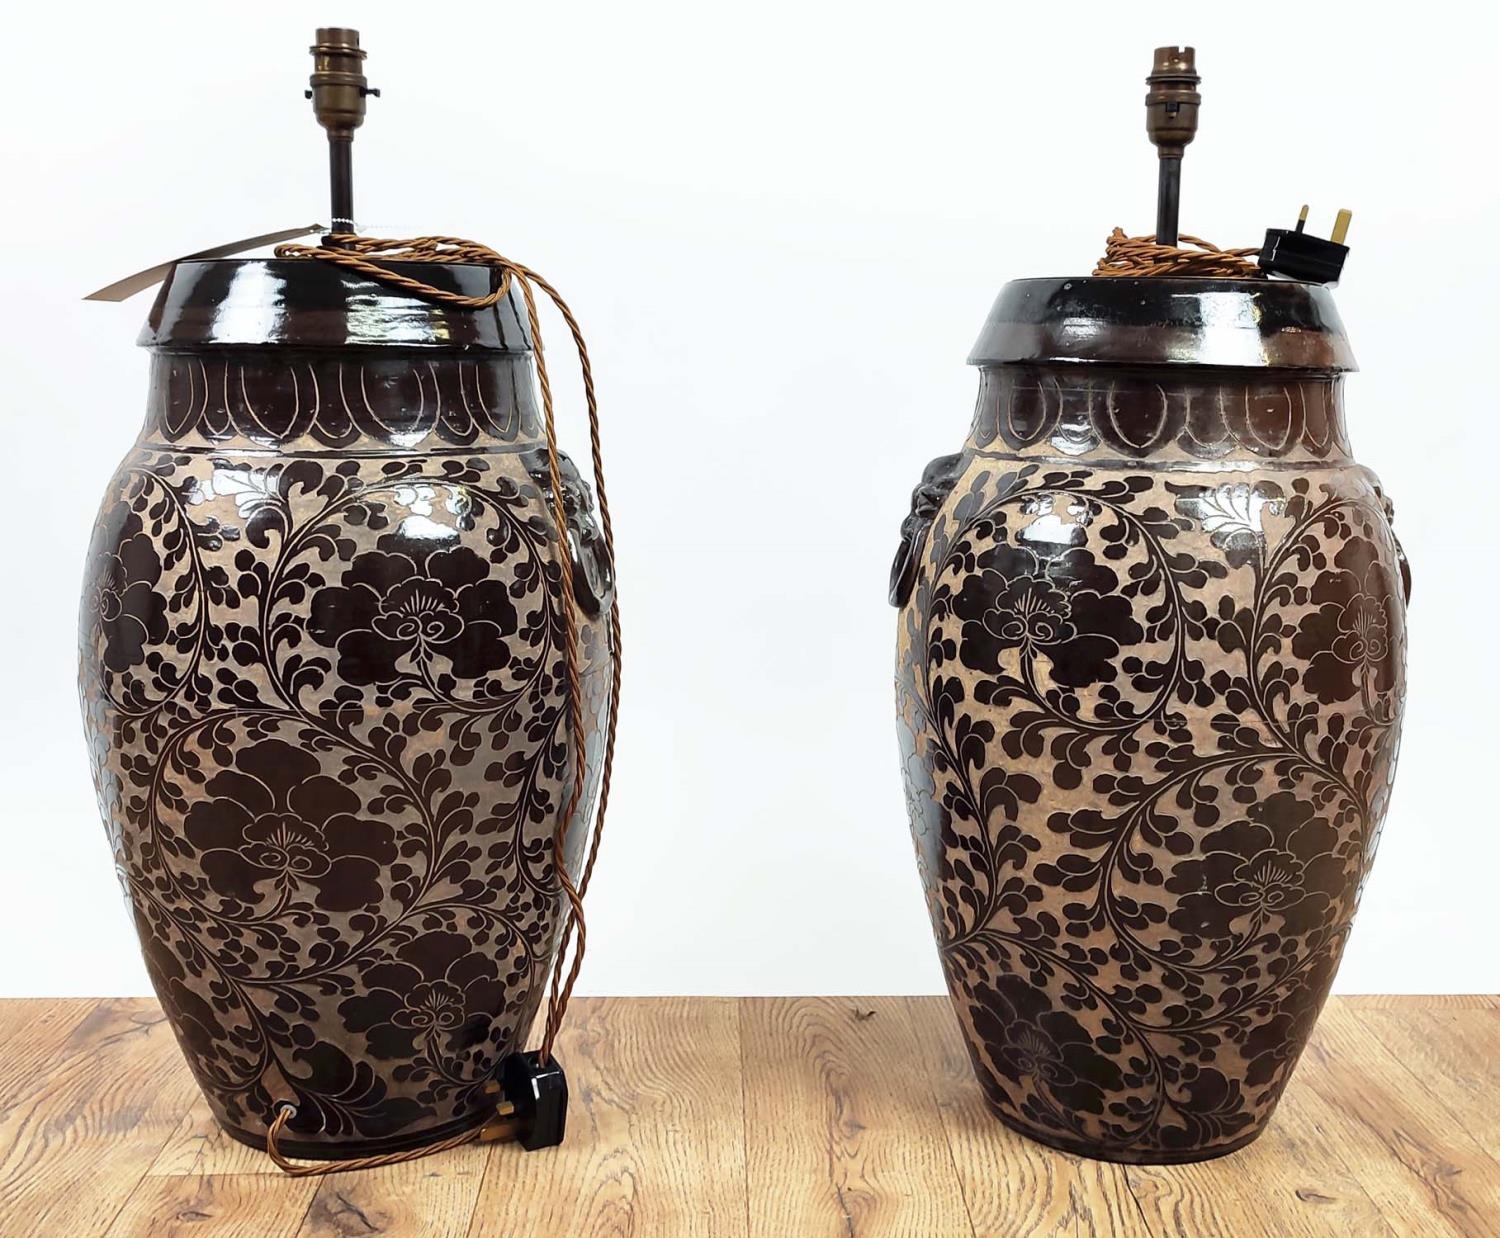 PAOLO MOSCHINO TABLE LAMPS, a pair, Chinese style ceramic, 64cm H. (2) - Image 3 of 14